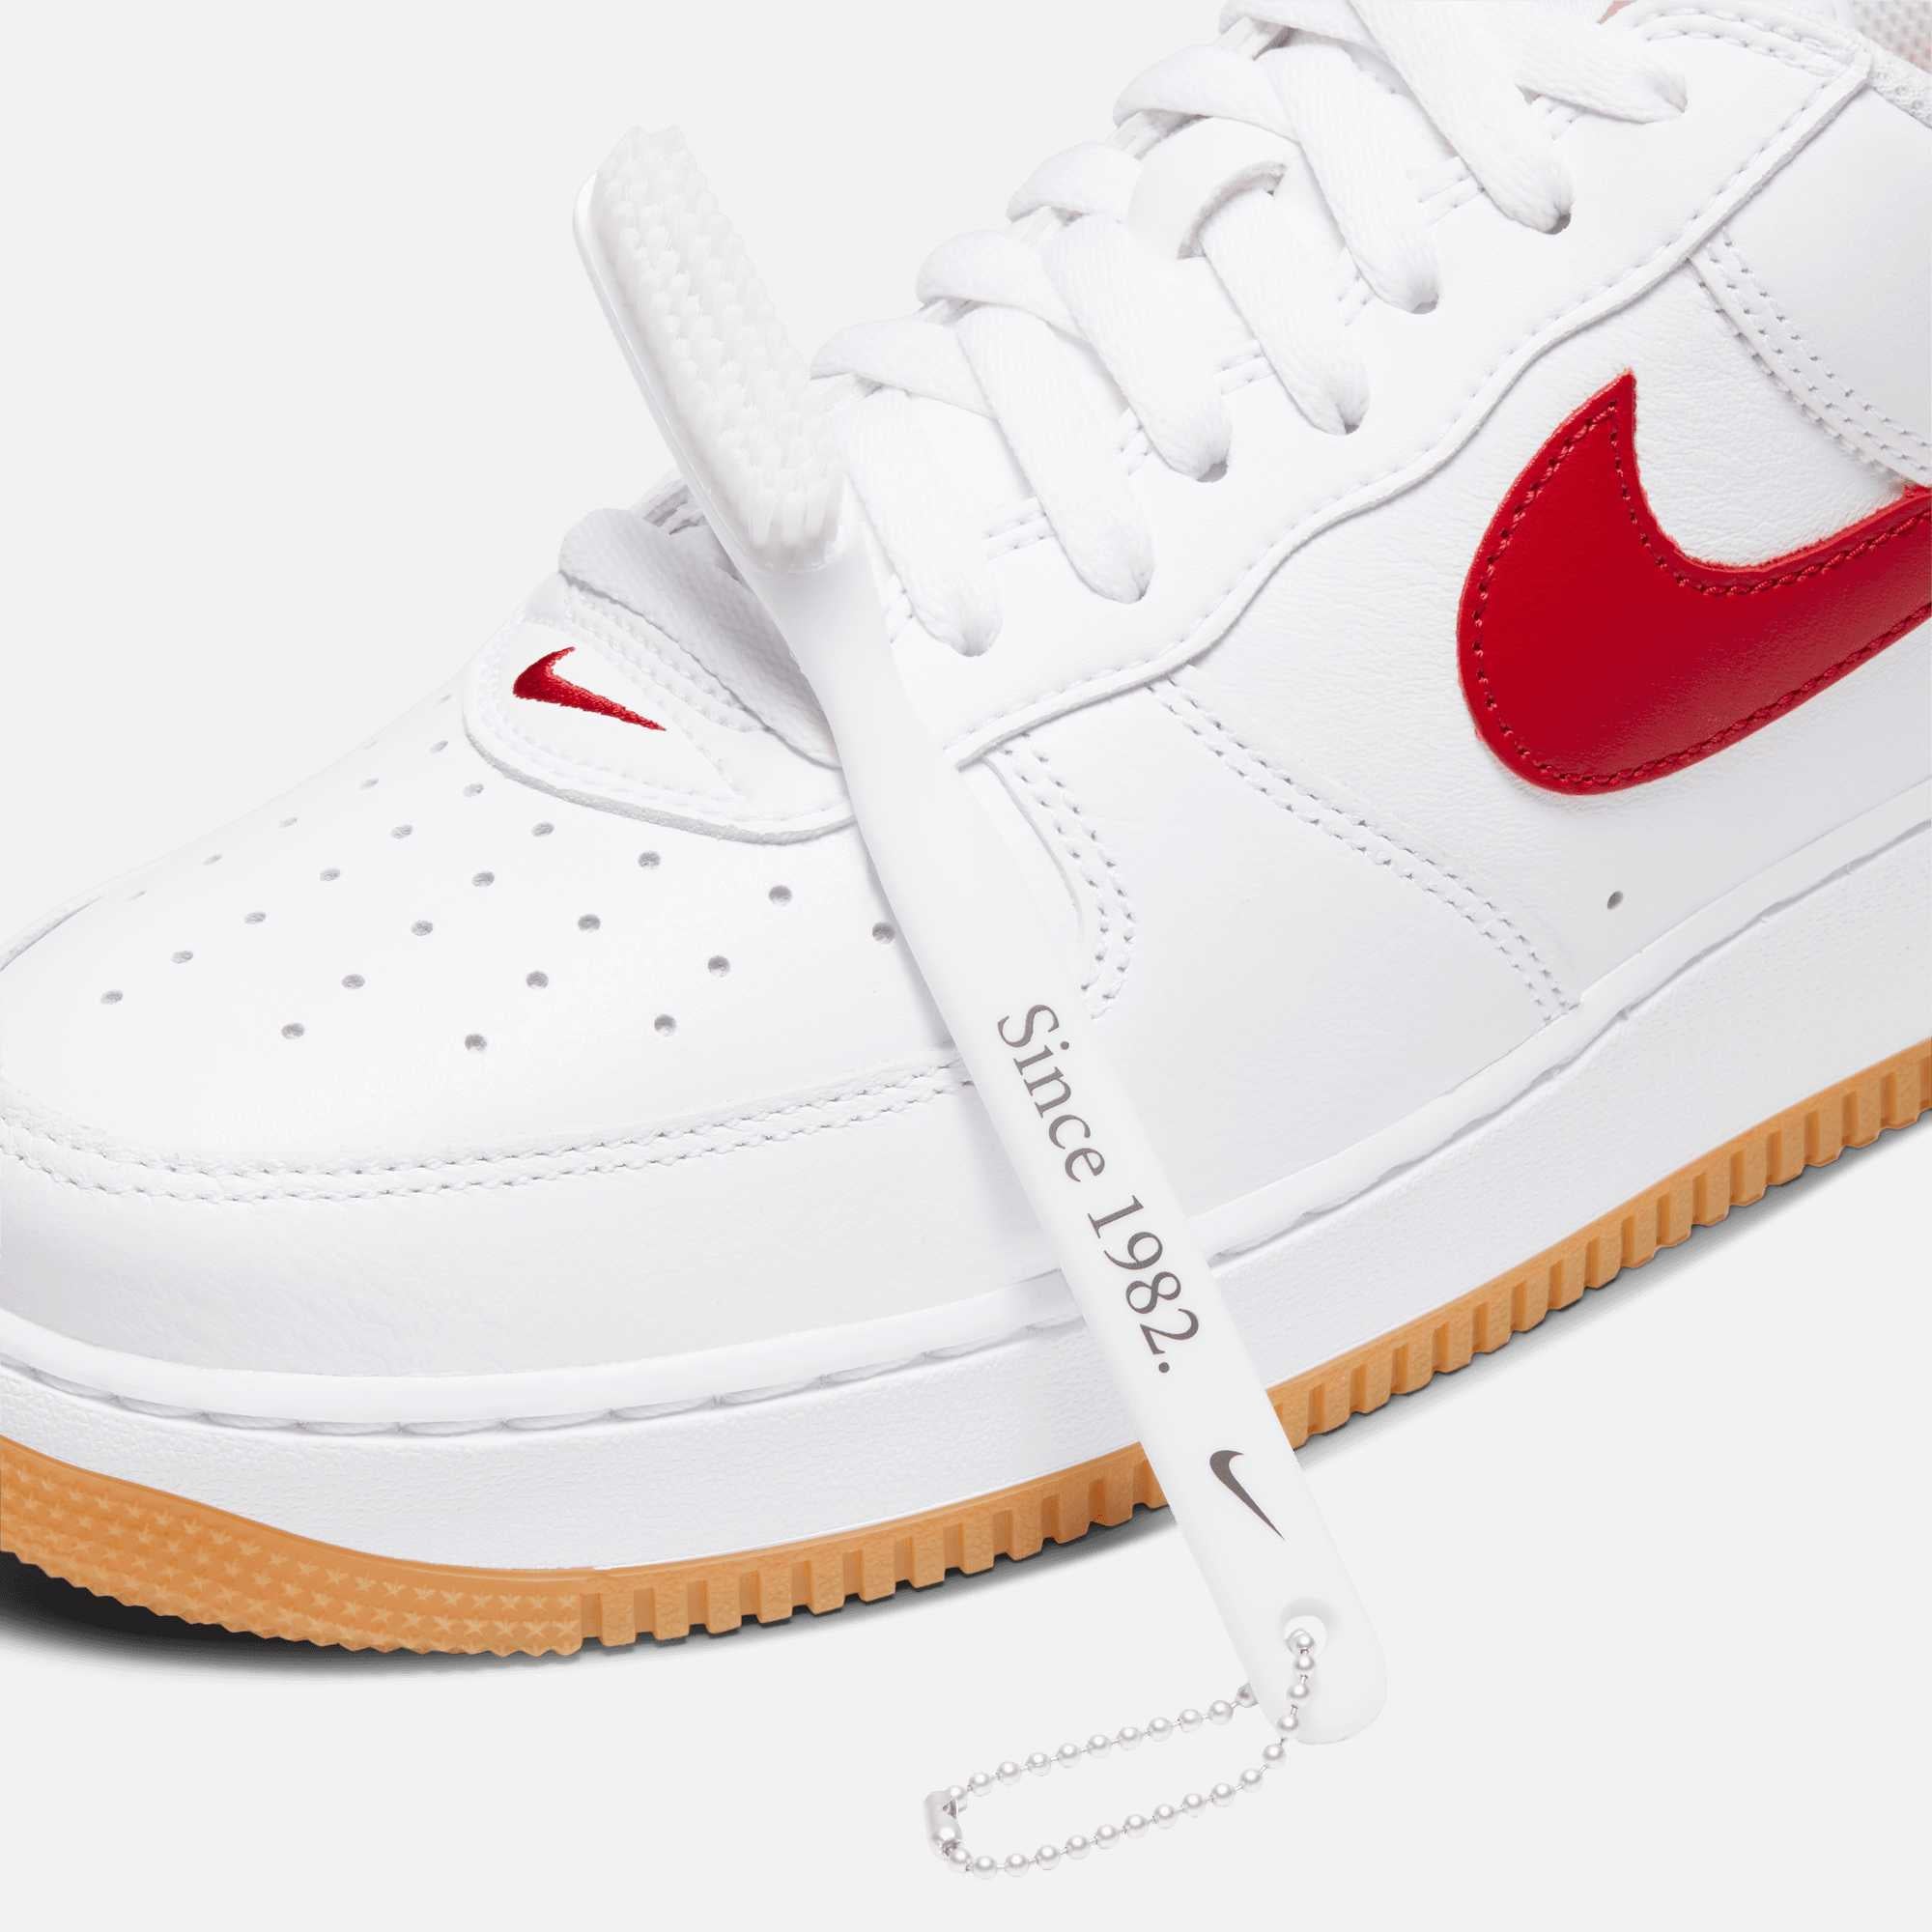 Nike Air Force 1 Low Retro 'Color Of The Month' - Puffer Reds